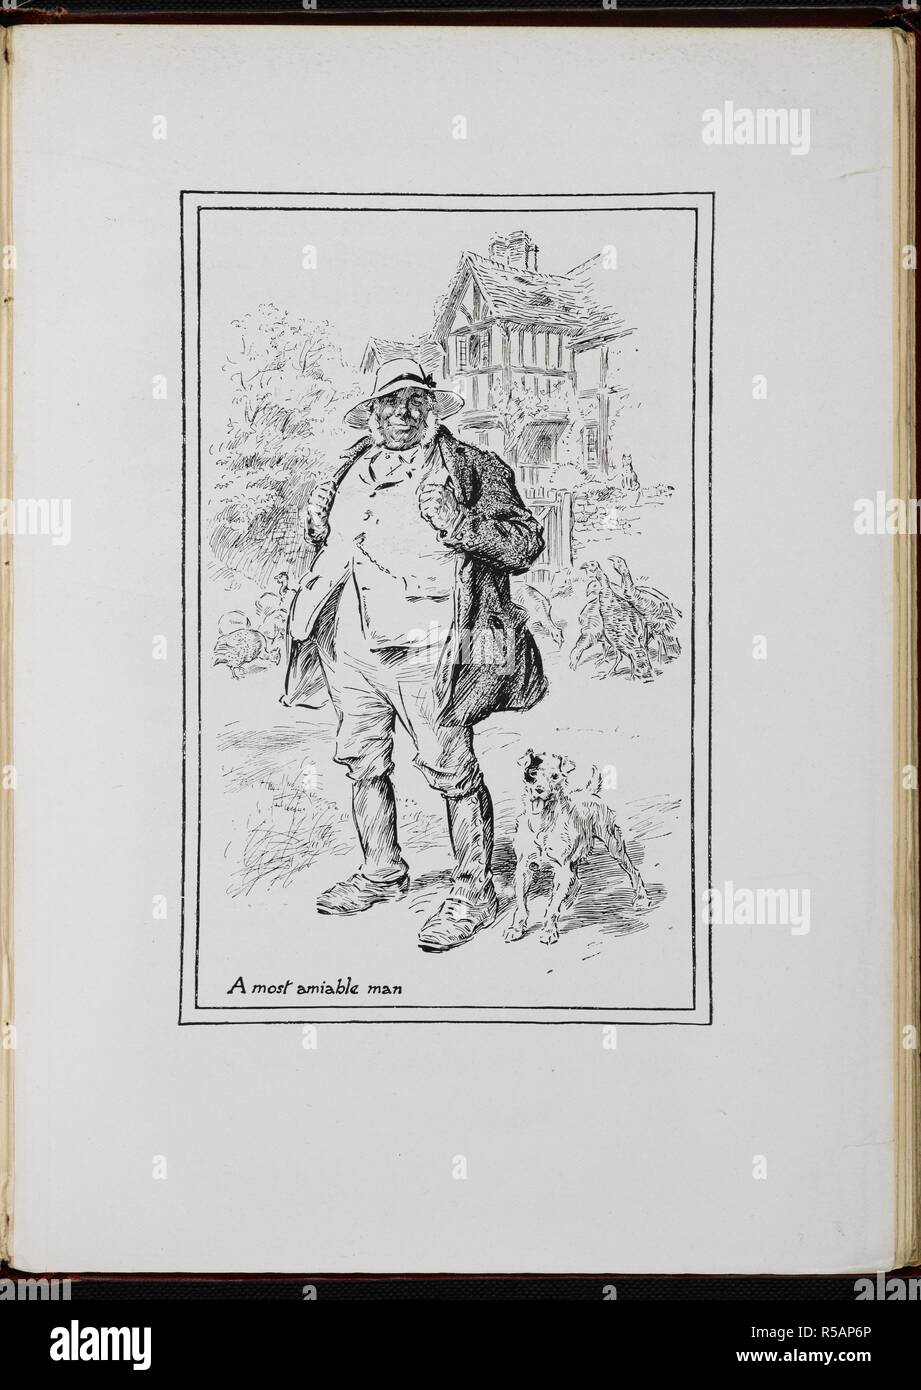 'A most amiable man'. The Railway Children With drawings by C E Brock. London : Wells Gardner & Co., 1906. Source: 12813.y.7 page 210. Language: English. Author: Brock, Charles Edmund. Nesbit, afterwards Bland, Edith. Stock Photo